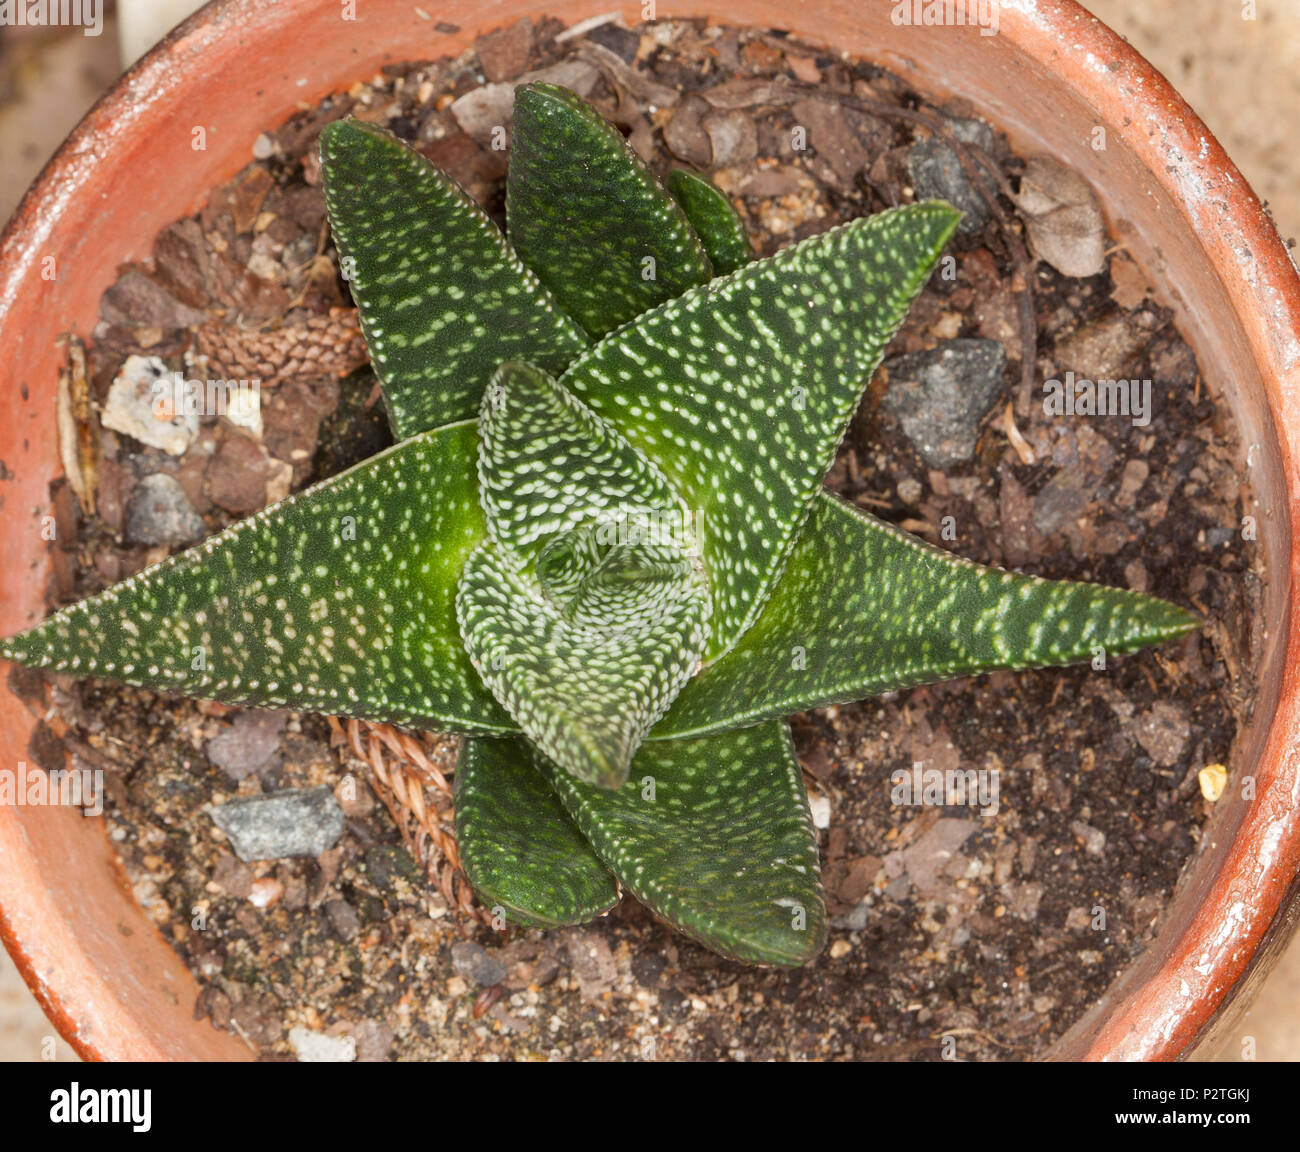 Drought tolerant succulent plant, Gasteria batesiana 'Okavango' with green leaves adorned with white spots (tubercles) growing in container Stock Photo